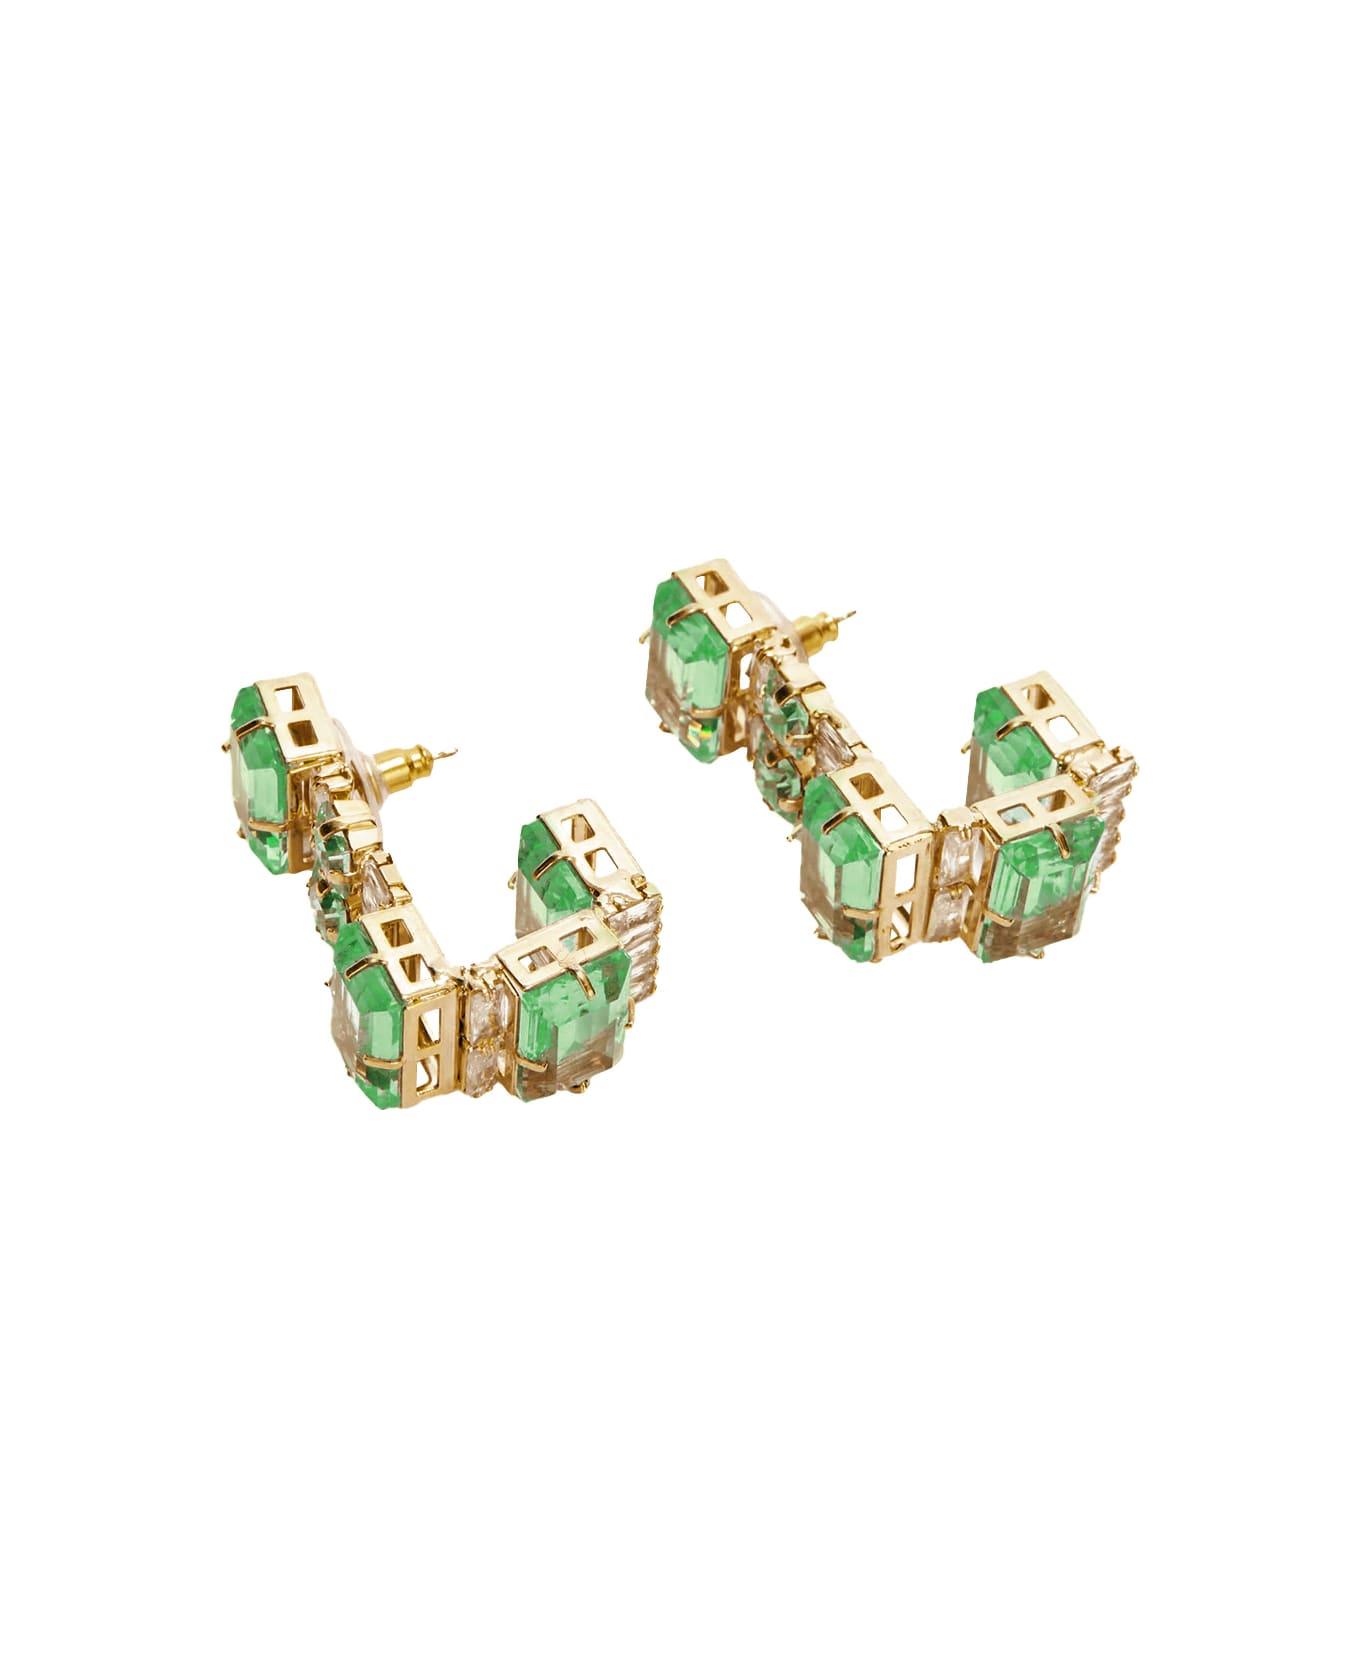 Ermanno Scervino Earrings With Green Stones - Green